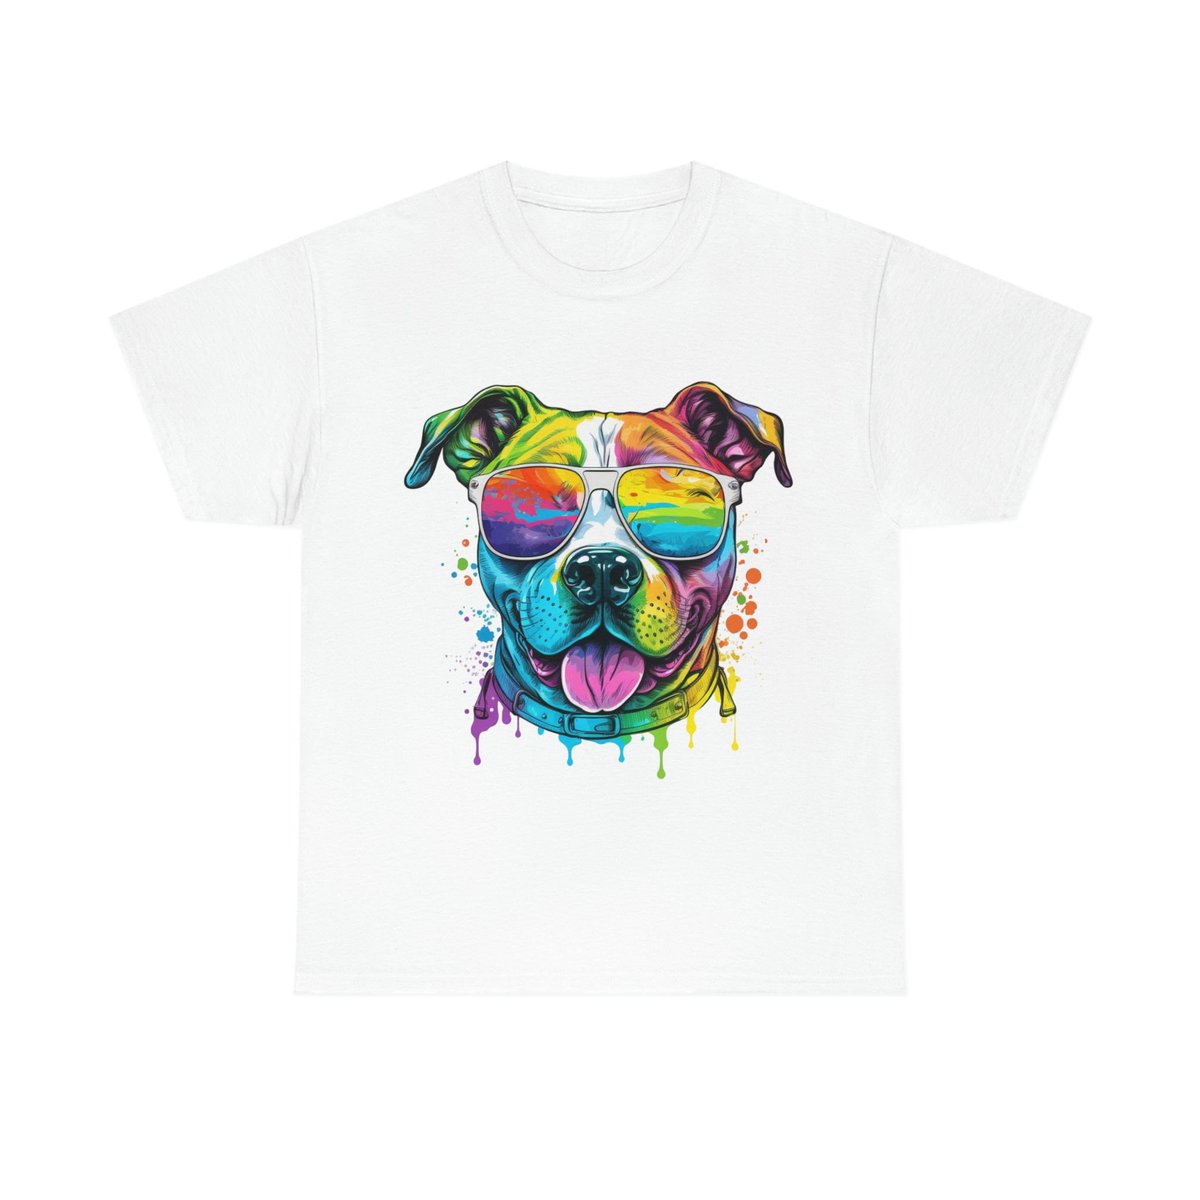 Our Cute colourful Staffordshire bull terrier top would be a great way to express your love for your staffy  #etsy #doglovergift #watercolourtshirt #womensgift #dogdad #multicolour #friendsandfamily #mhhsbd etsy.me/3ldGDaw